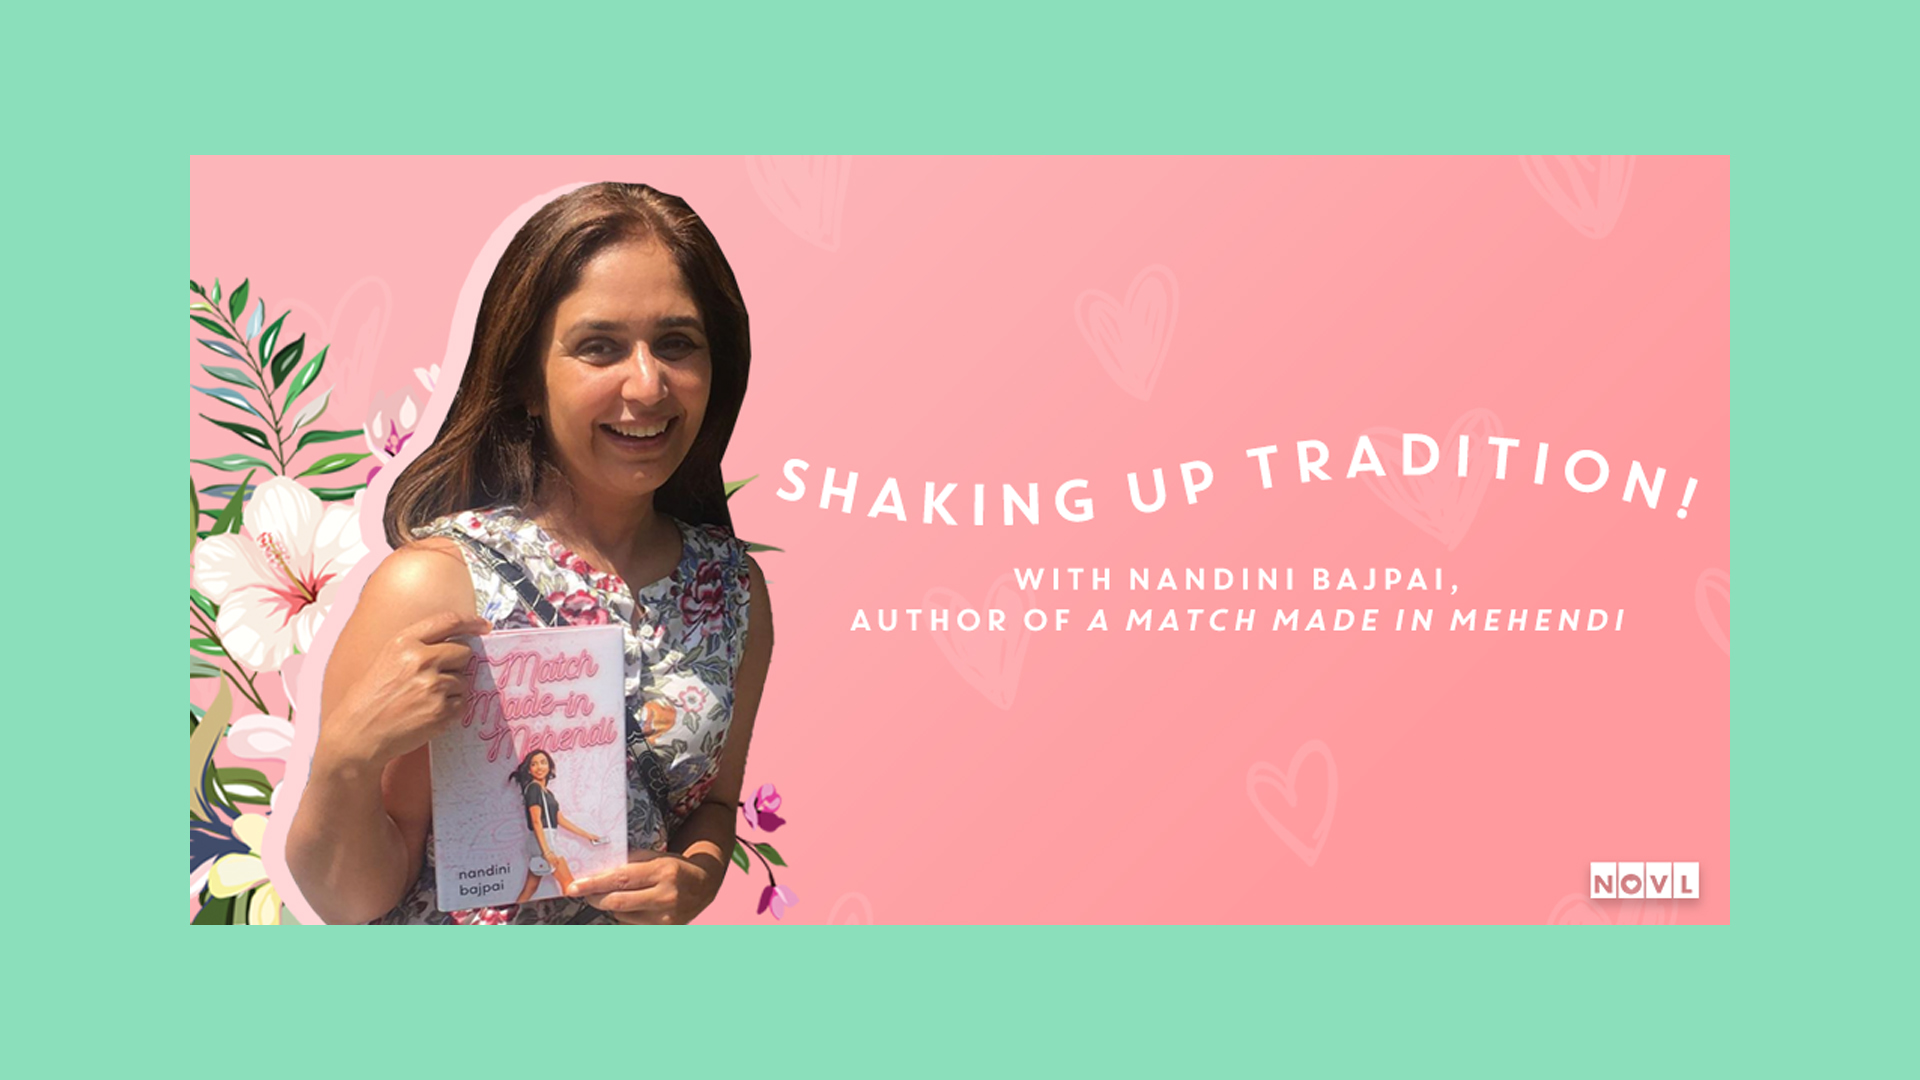 The NOVL Blog, Featured Image for Article: Shaking Up Tradition! with Nandini Bajpai